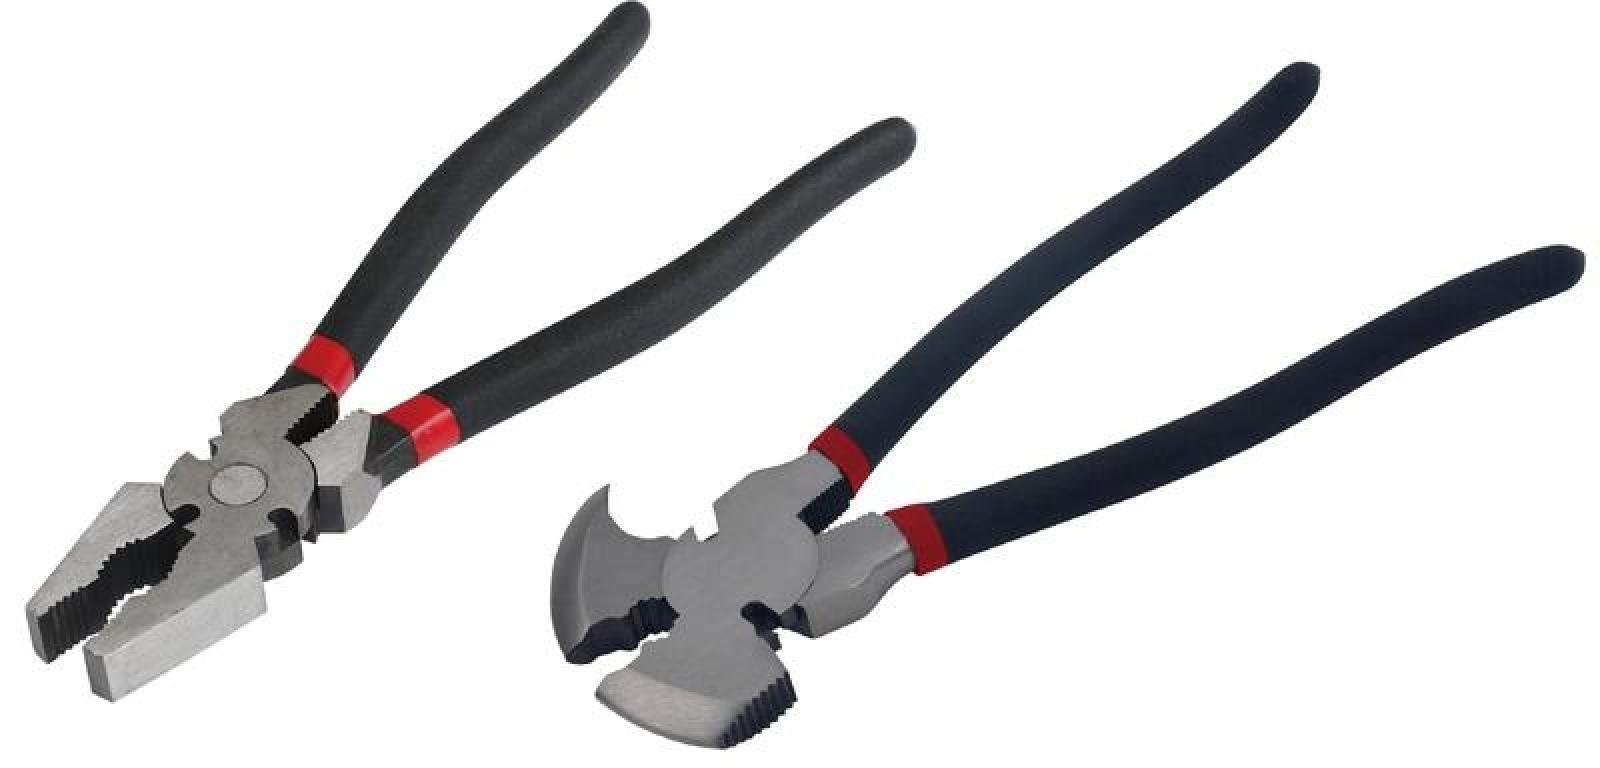 King Tools Fencing & Linesman Pliers Set